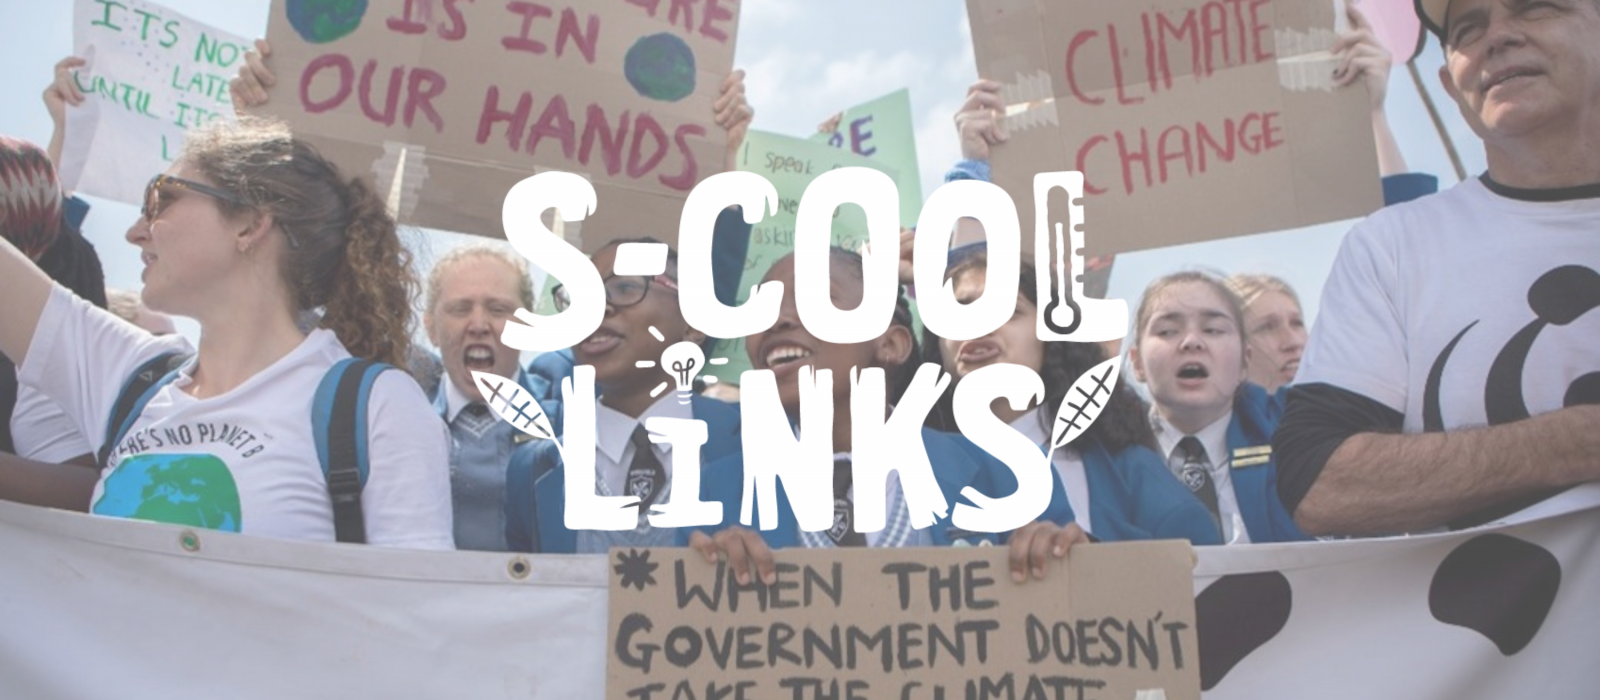 S-Cool-Links banner | Photo credit: NY Times